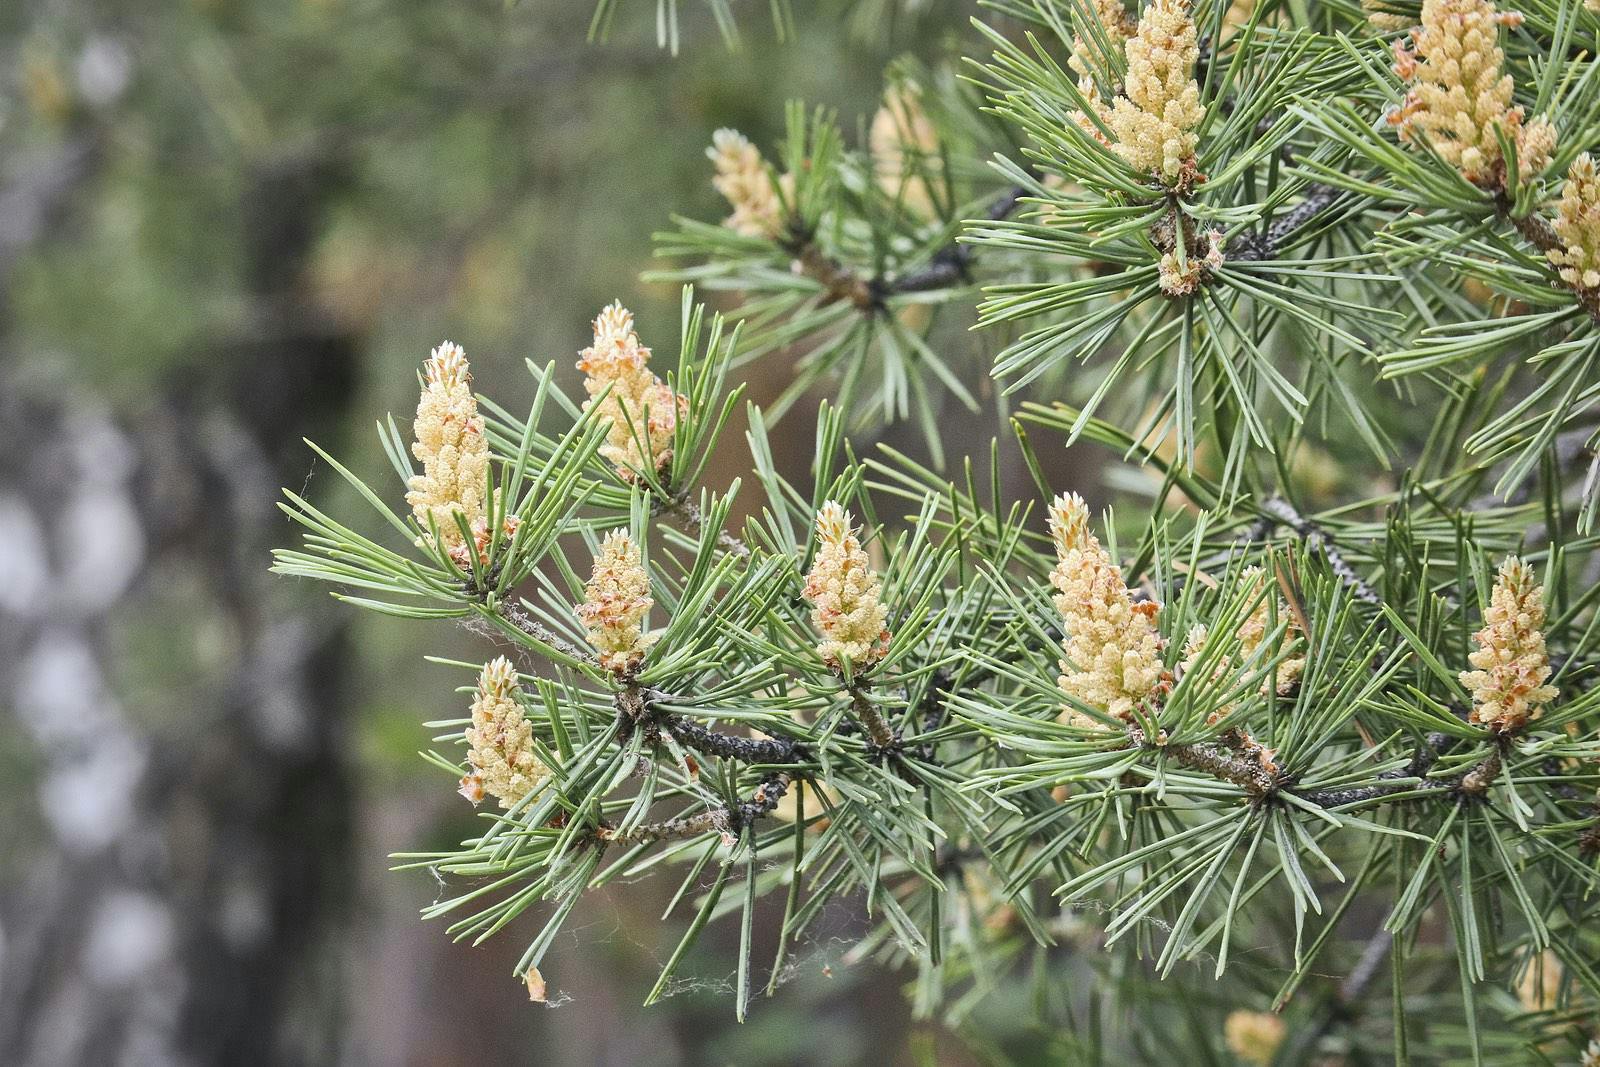 cones hold pine pollen, May cause allergy symptoms